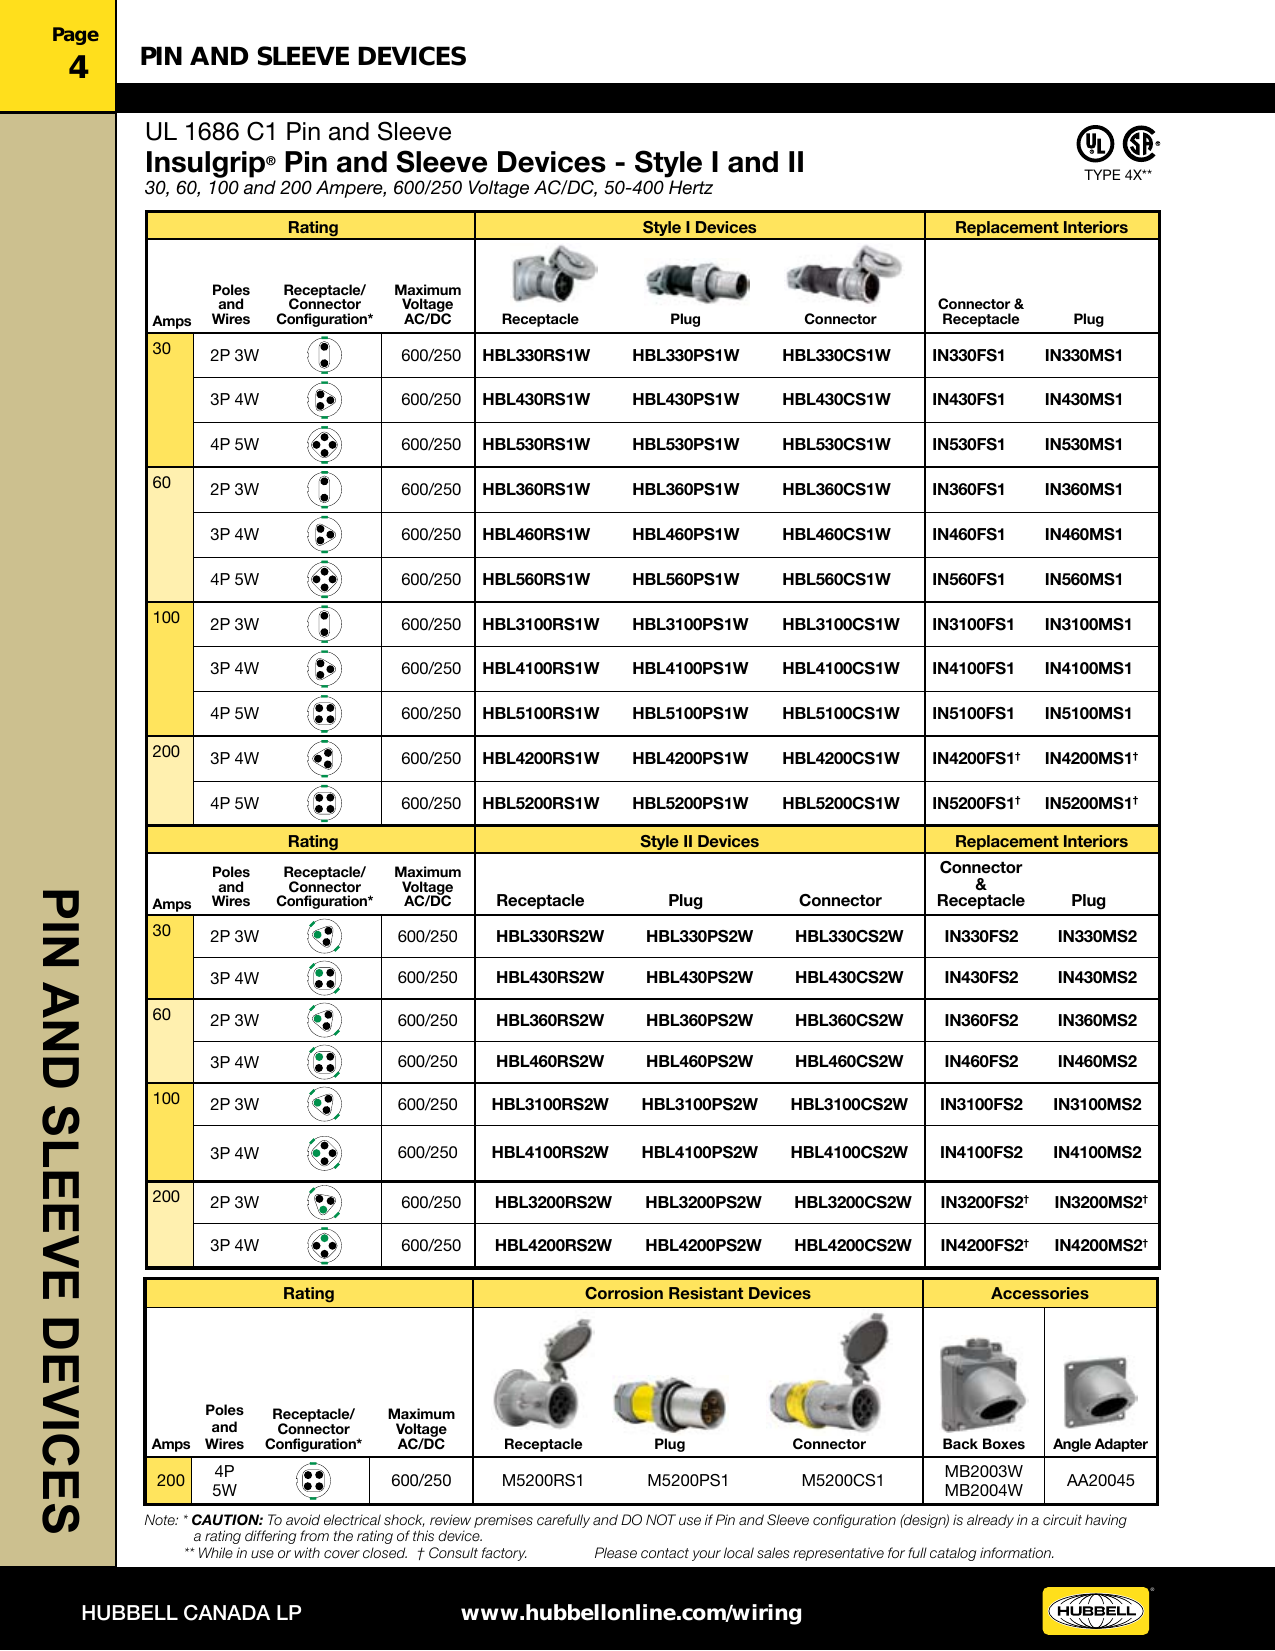 Page 4 of 6 - Product Detail Manual 